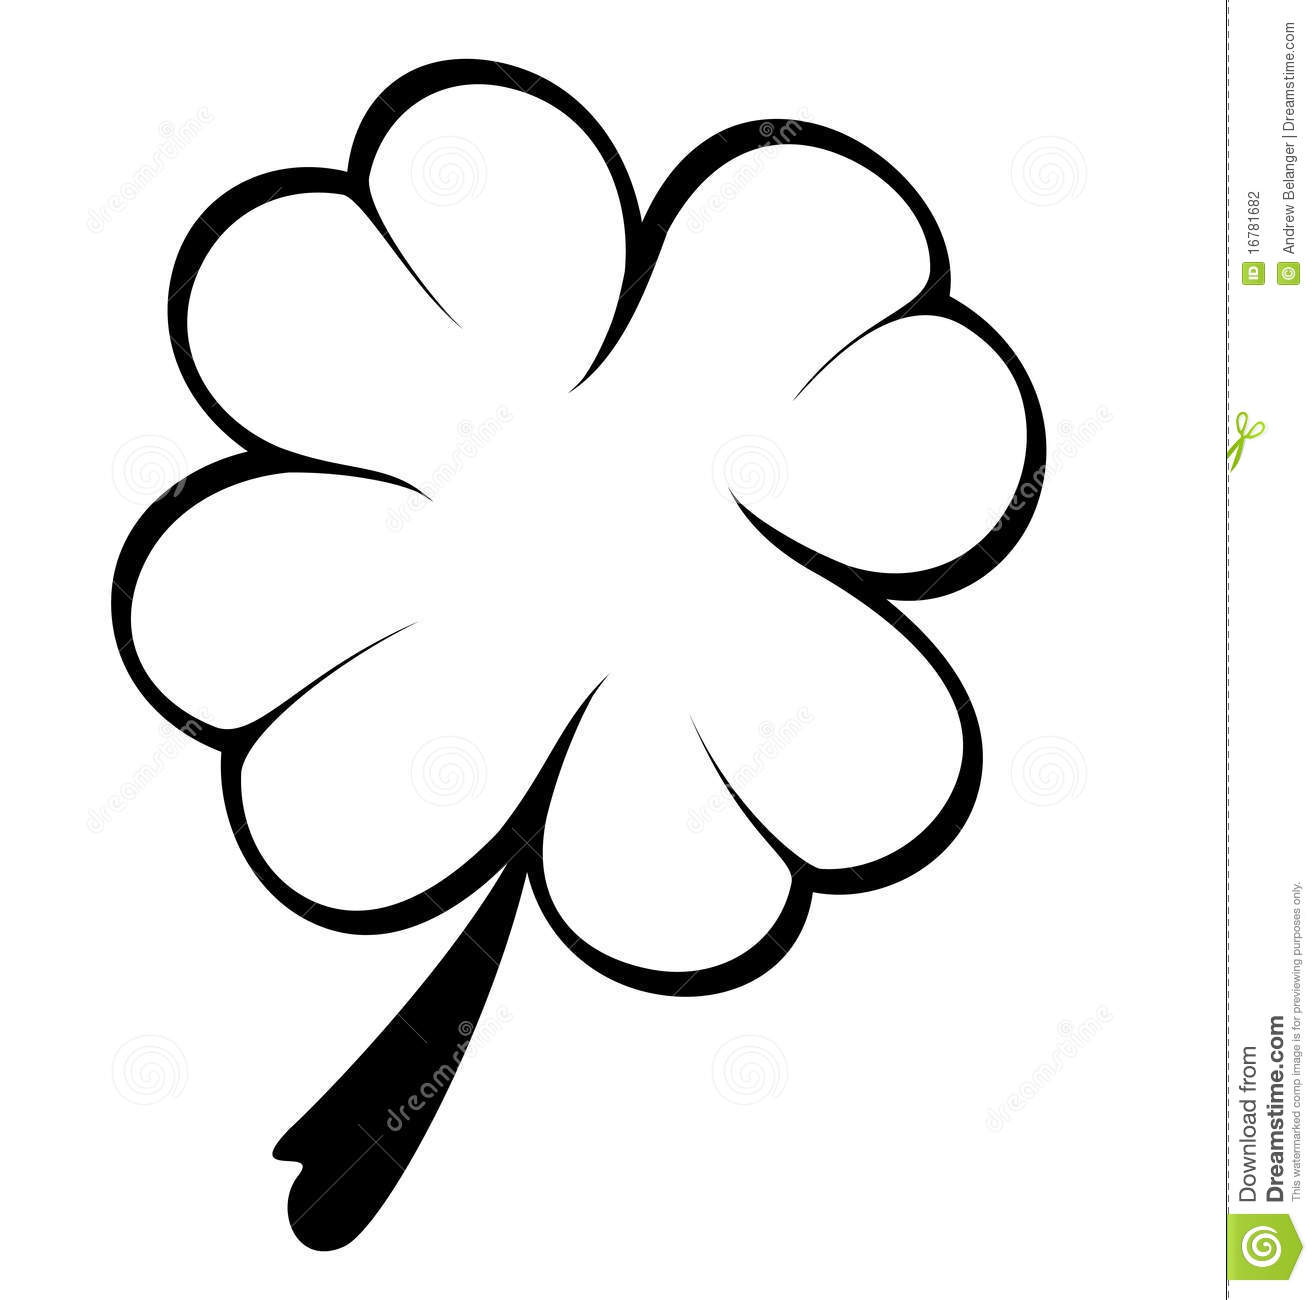 Black And White Four Leaf Clover Stock Photography   Image  16781682